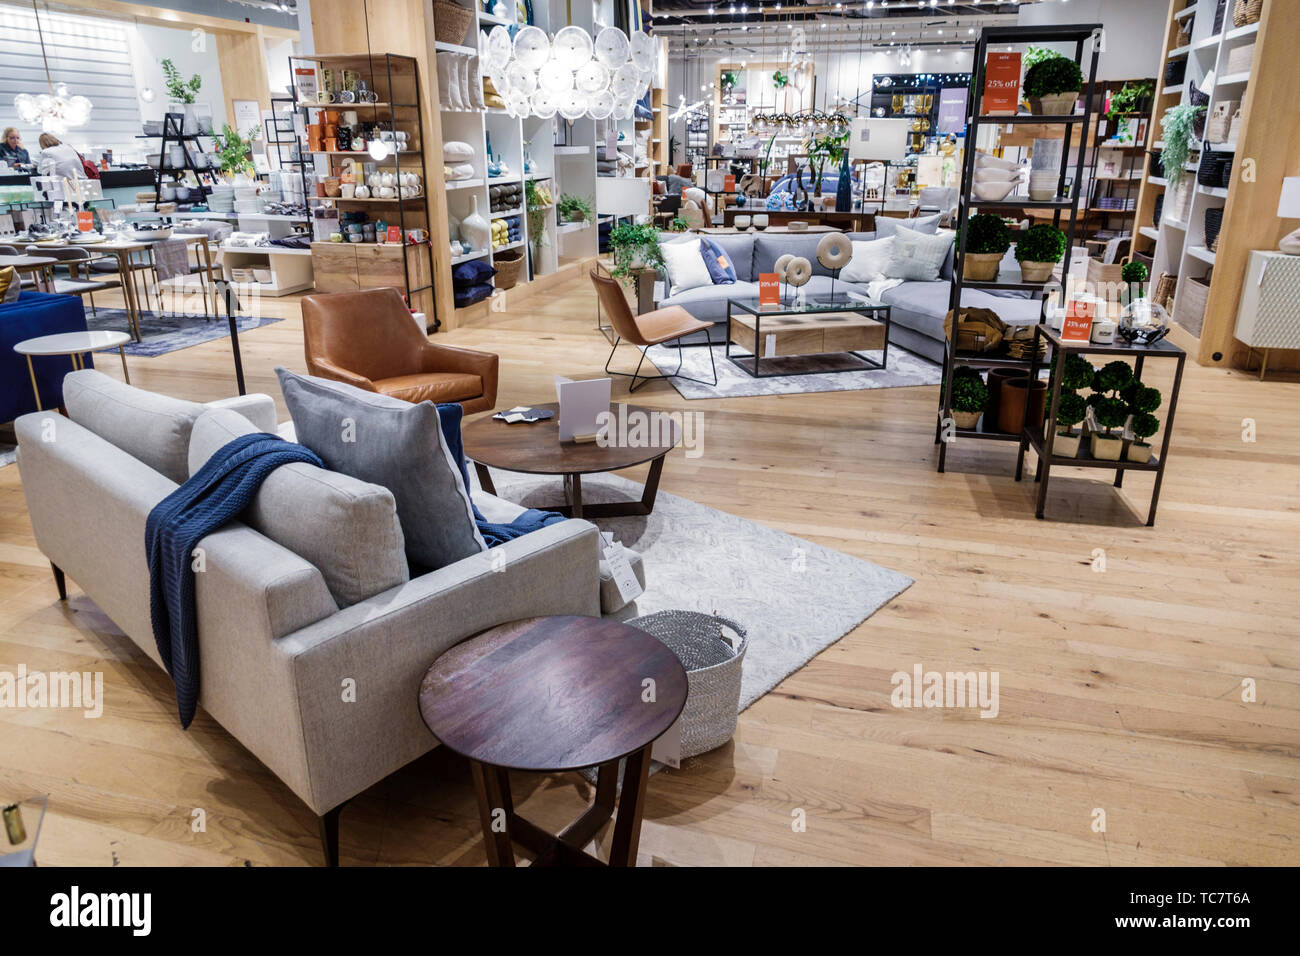 Miami Florida,The Shops at Midtown Miami,West Elm,inside interior,furniture household items furnishings,sofa chairs,display sale,shopping shopper shop Stock Photo